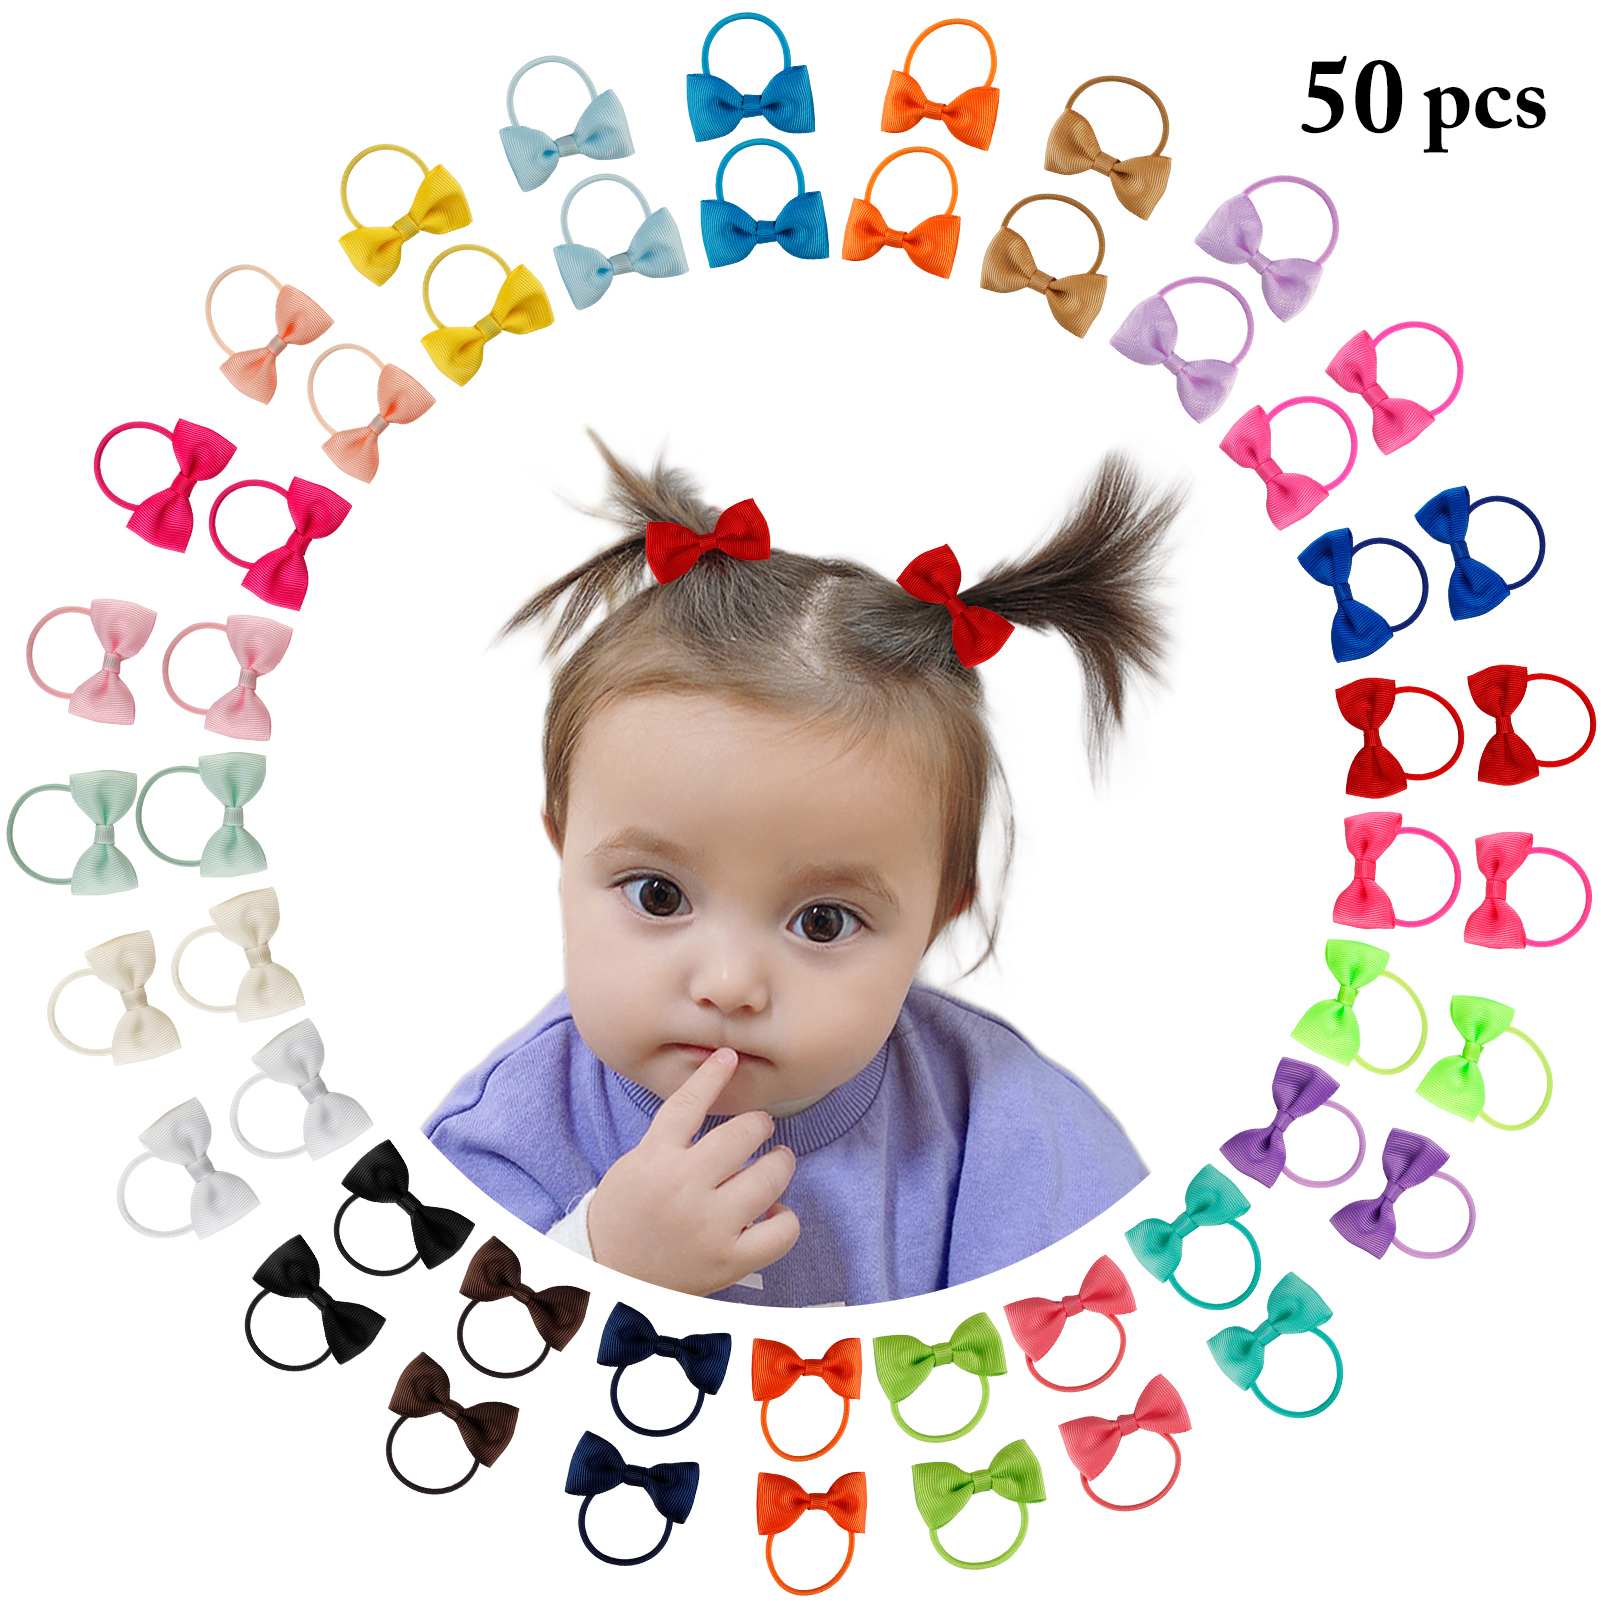 Peaoy 50PCS Baby Hair Ties with Bows for Infants Toddler Girls Grosgrain Ribbon Rubber Bands Elastic Ponytail Holders 2 Inch - image 1 of 9